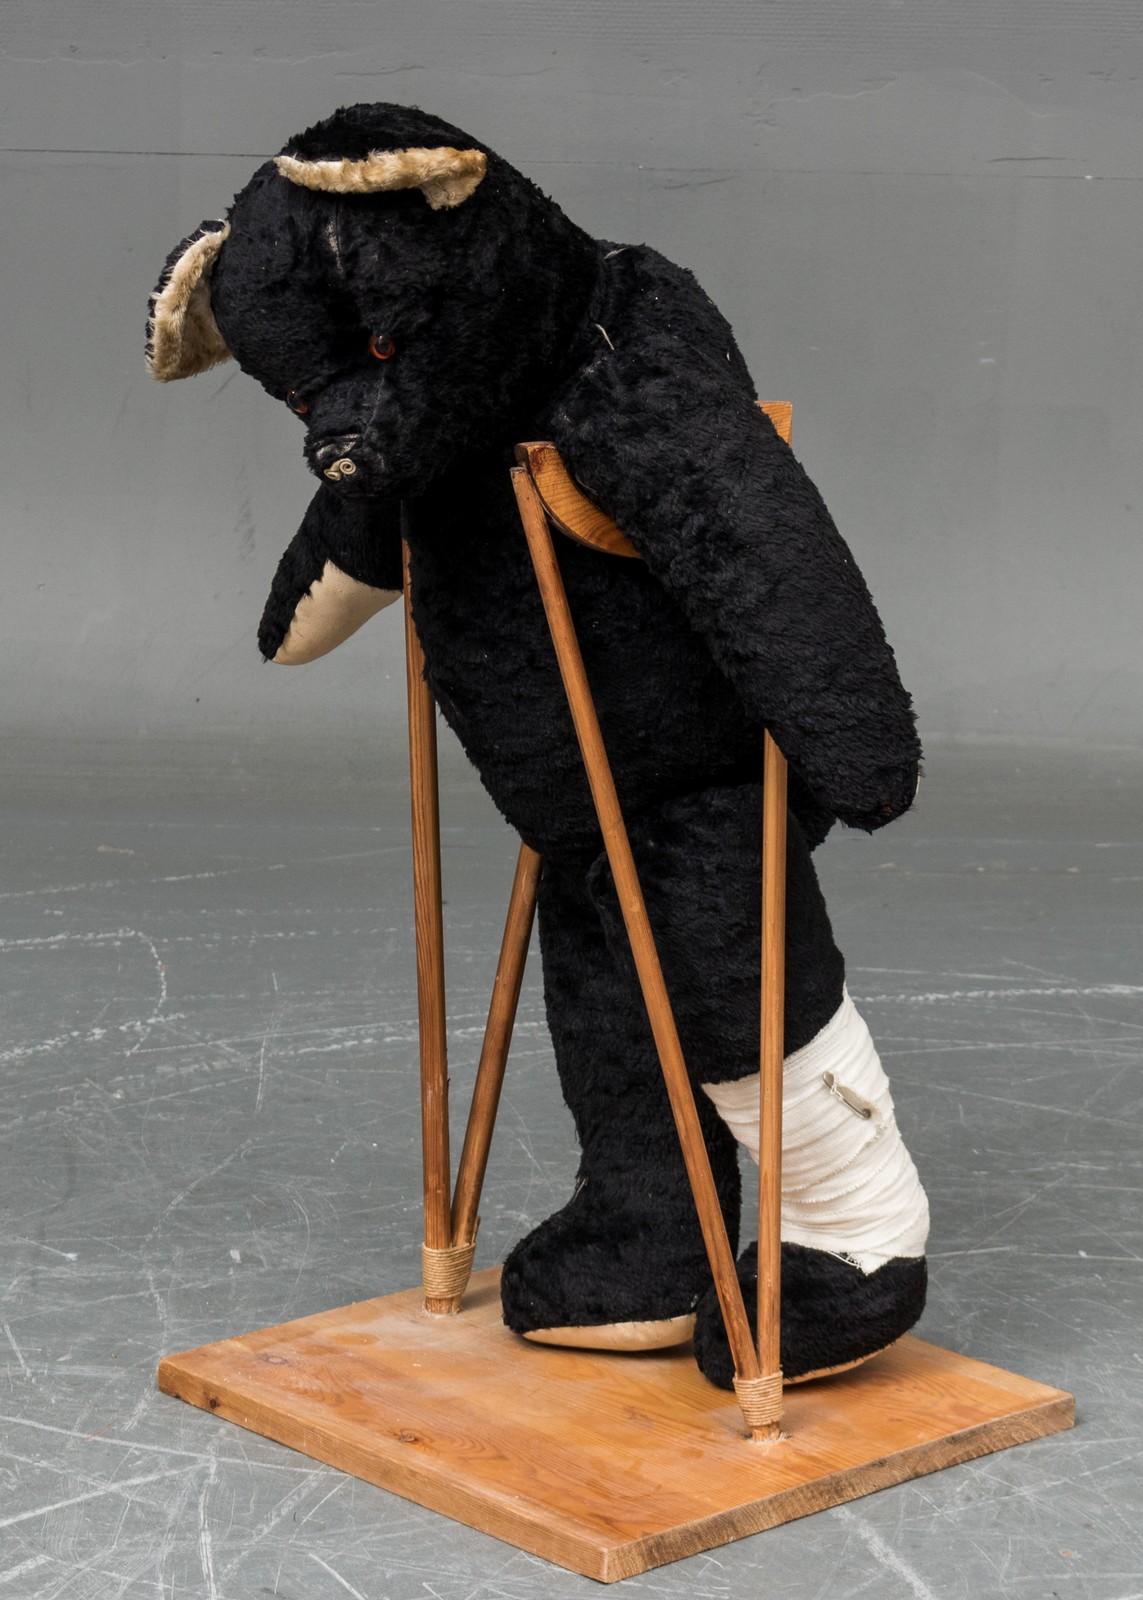 Teddy bear on crutches, ant. 1930. Nose wear and minor hole at one foot.